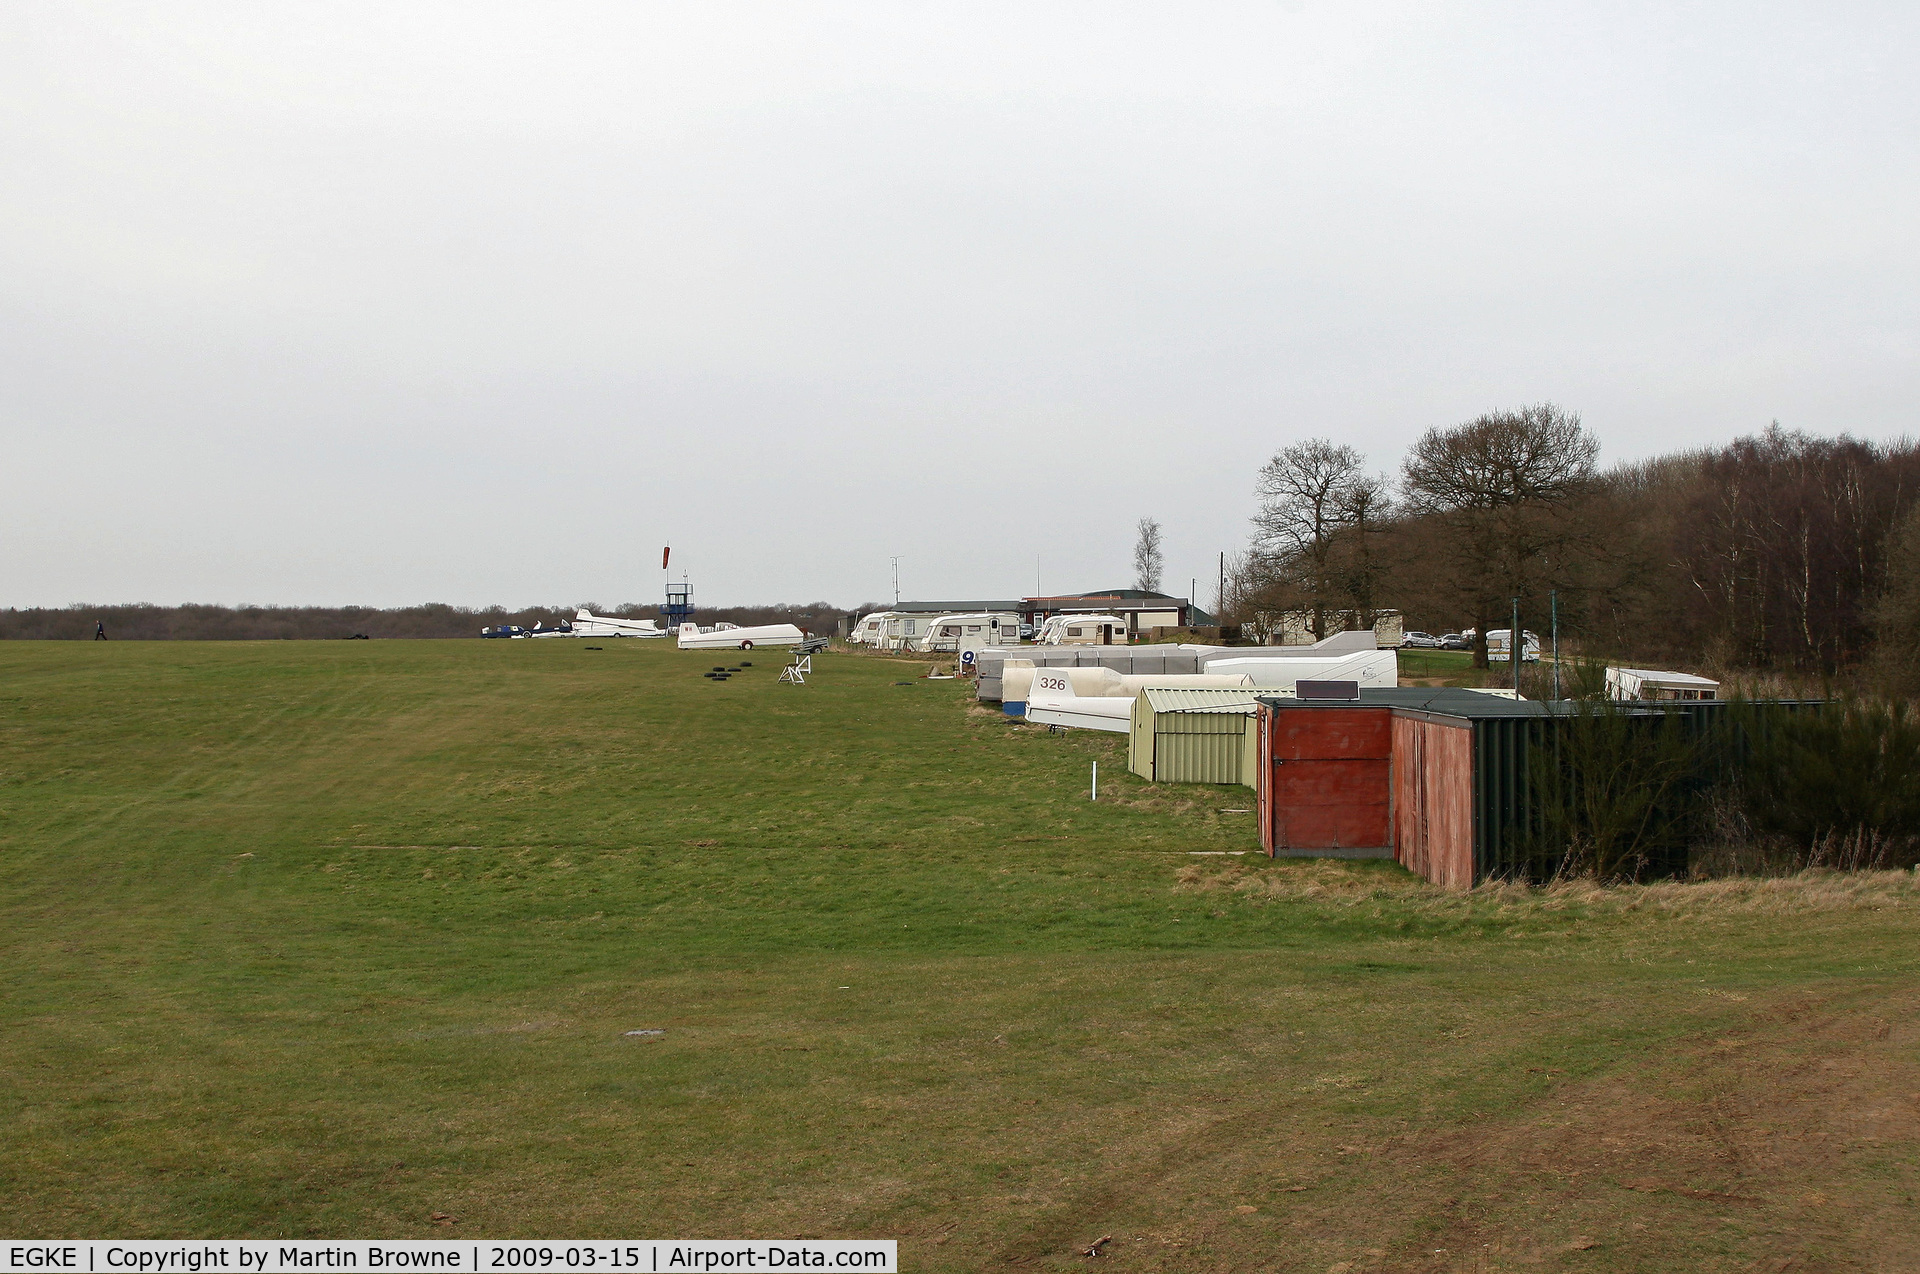 Challock Airport, Challock, England United Kingdom (EGKE) - Looking past the caravan park towards the admin buildings - from the motor glider hangar.